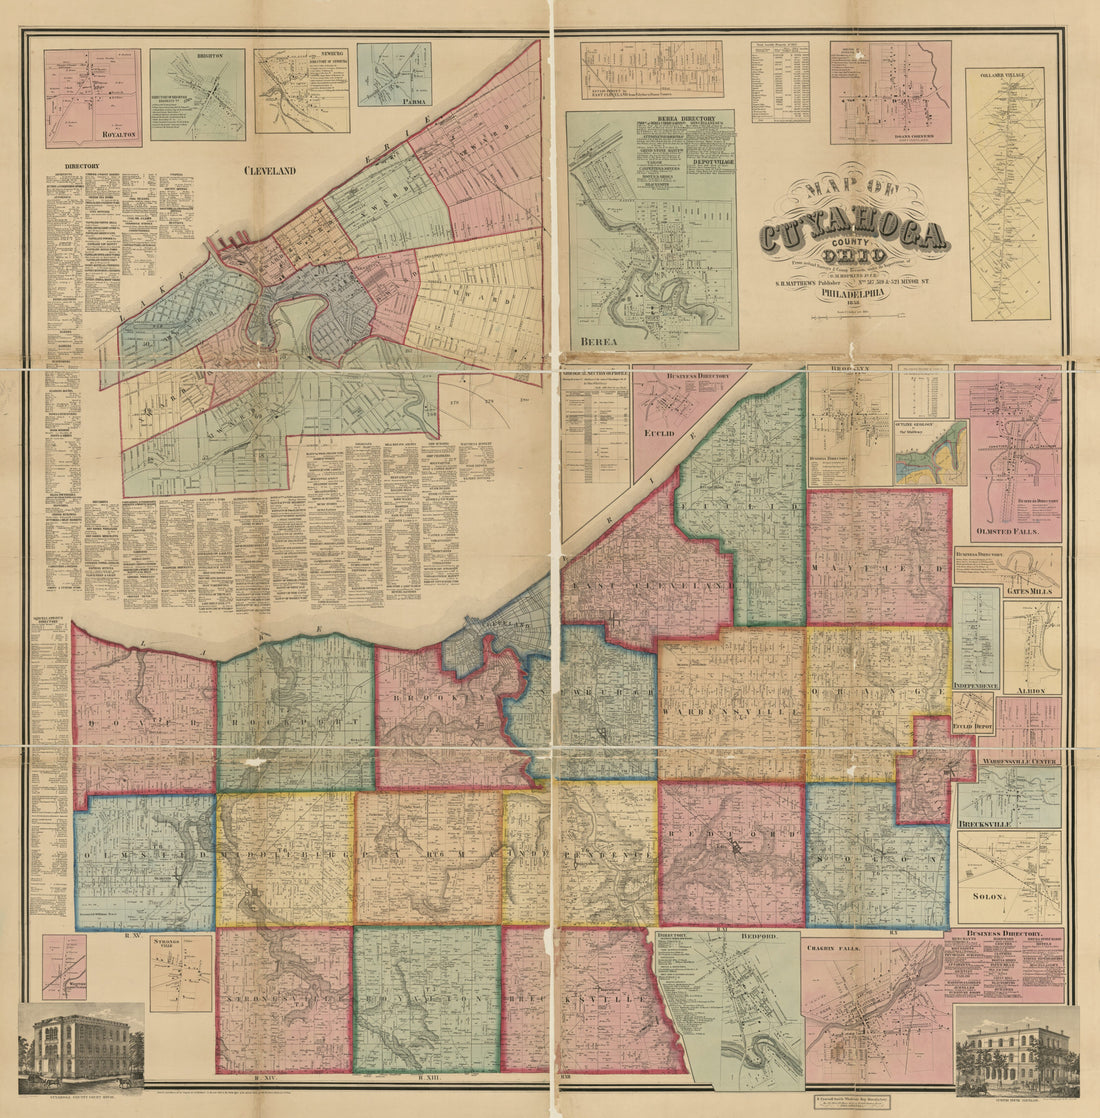 This old map of Map of Cuyahoga County, Ohio from 1858 was created by Griffith Morgan Hopkins, S. H. Matthews in 1858